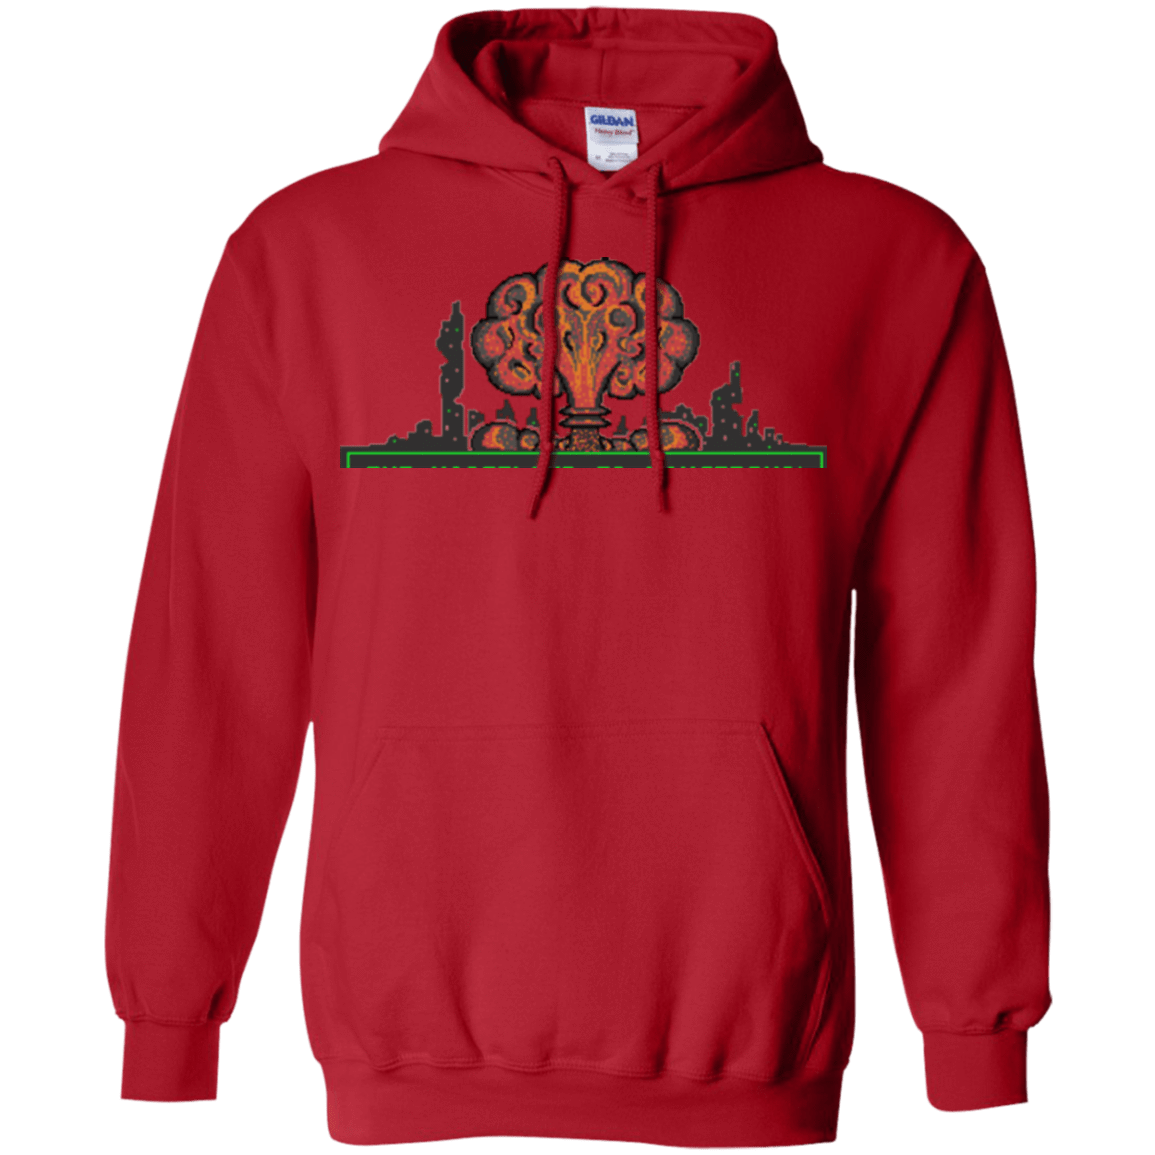 Sweatshirts Red / Small The Wasteland is Dangerous Pullover Hoodie